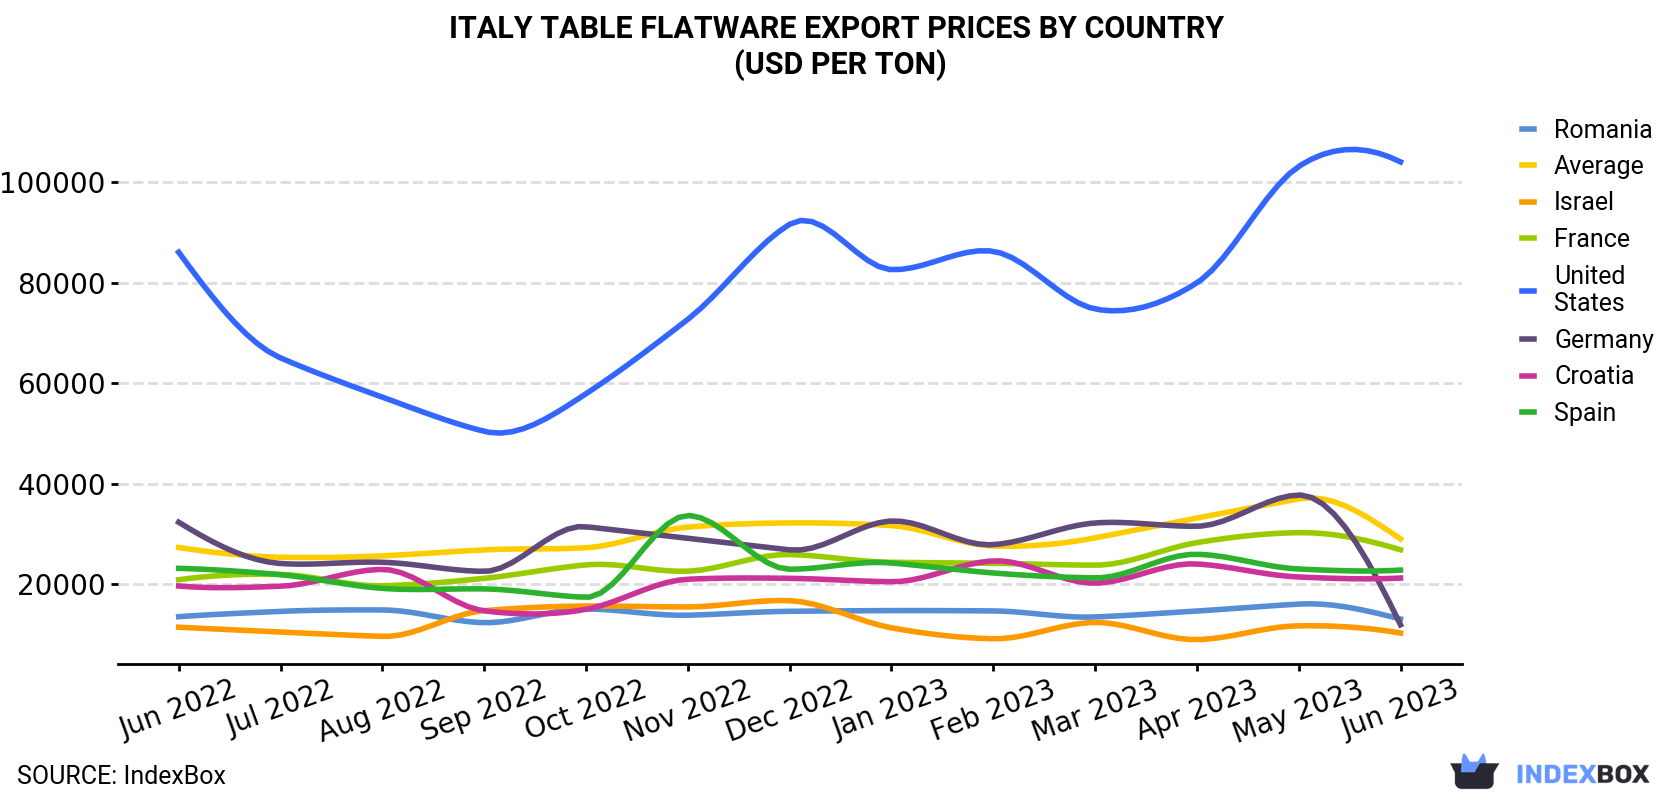 Italy Table Flatware Export Prices By Country (USD Per Ton)